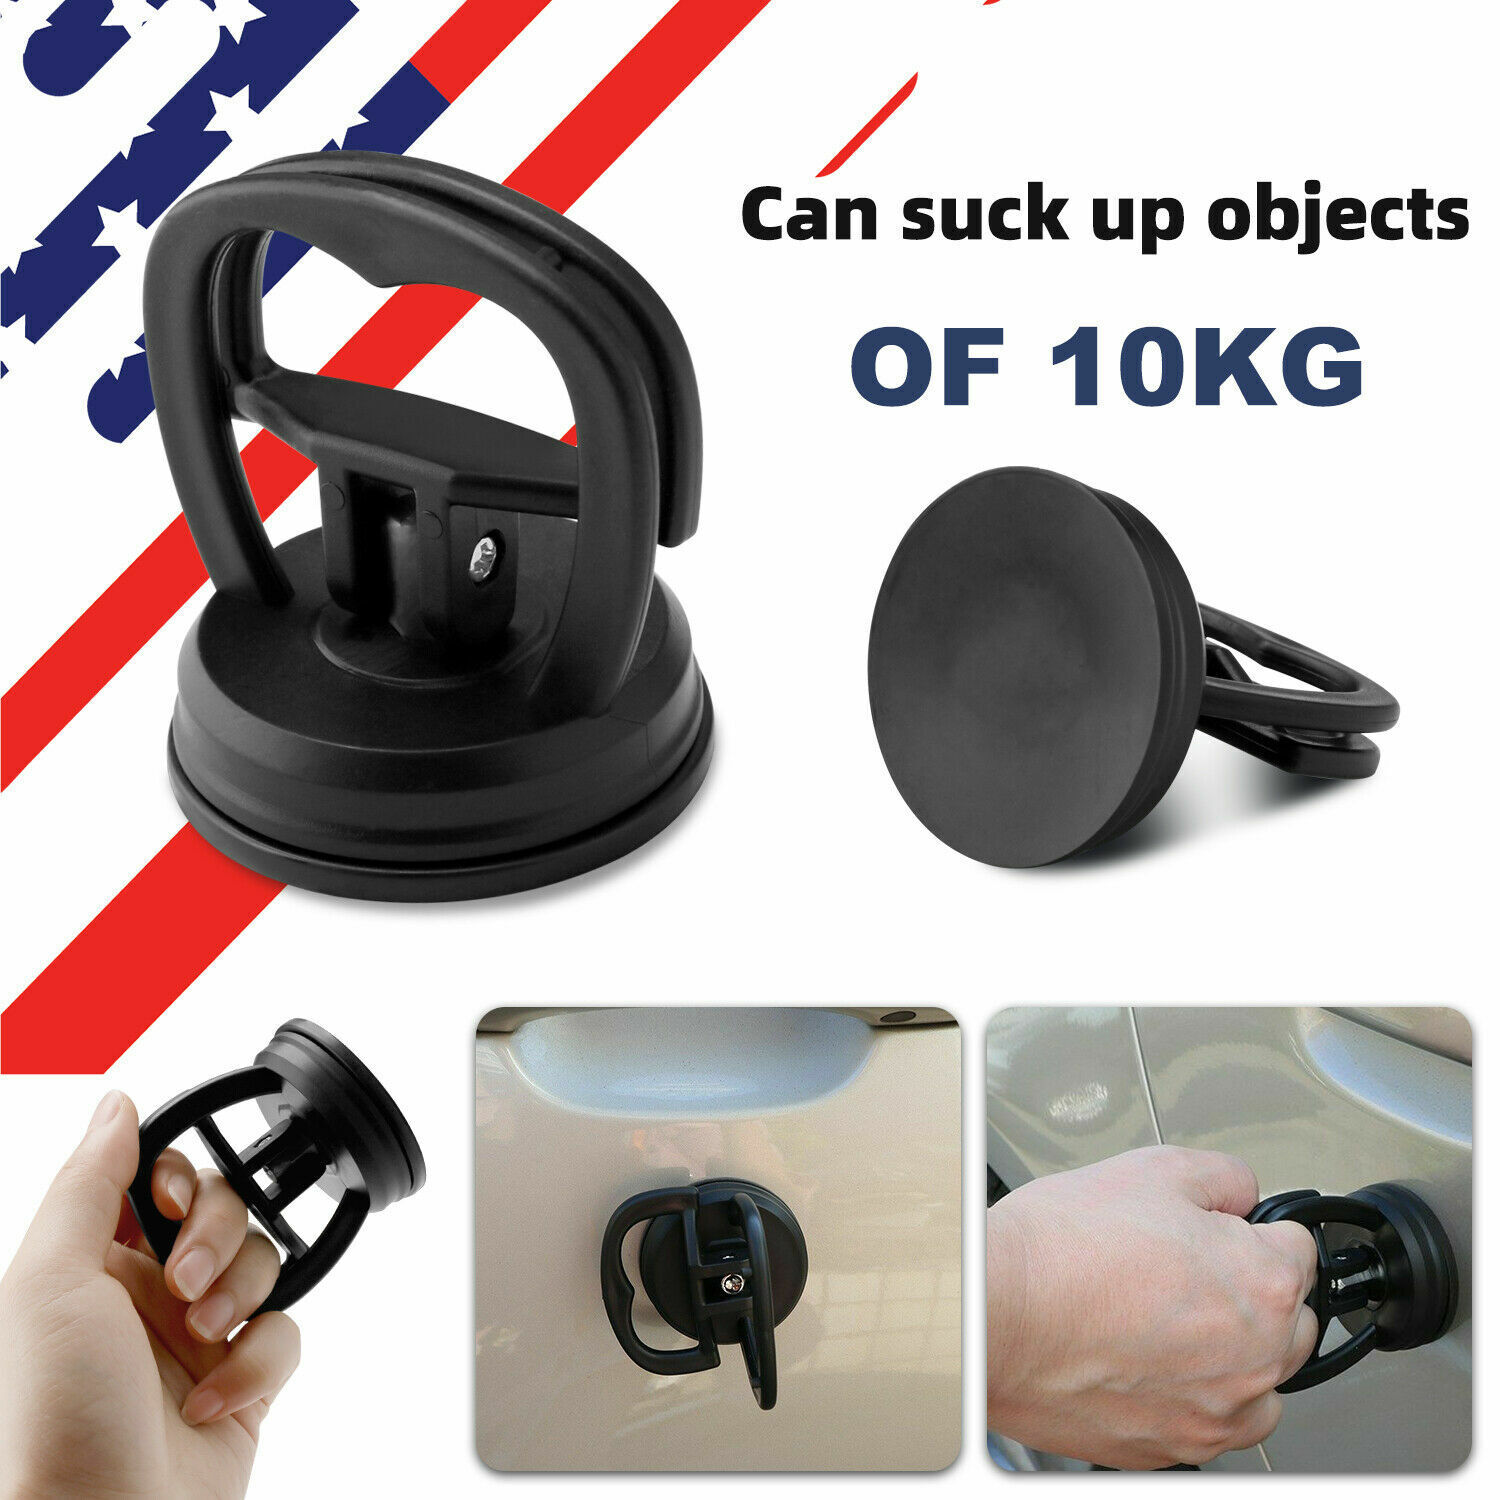 Auto Car Body DENT PULLER Suction Repair Pull Panel Ding Remover Sucker Cup Tool